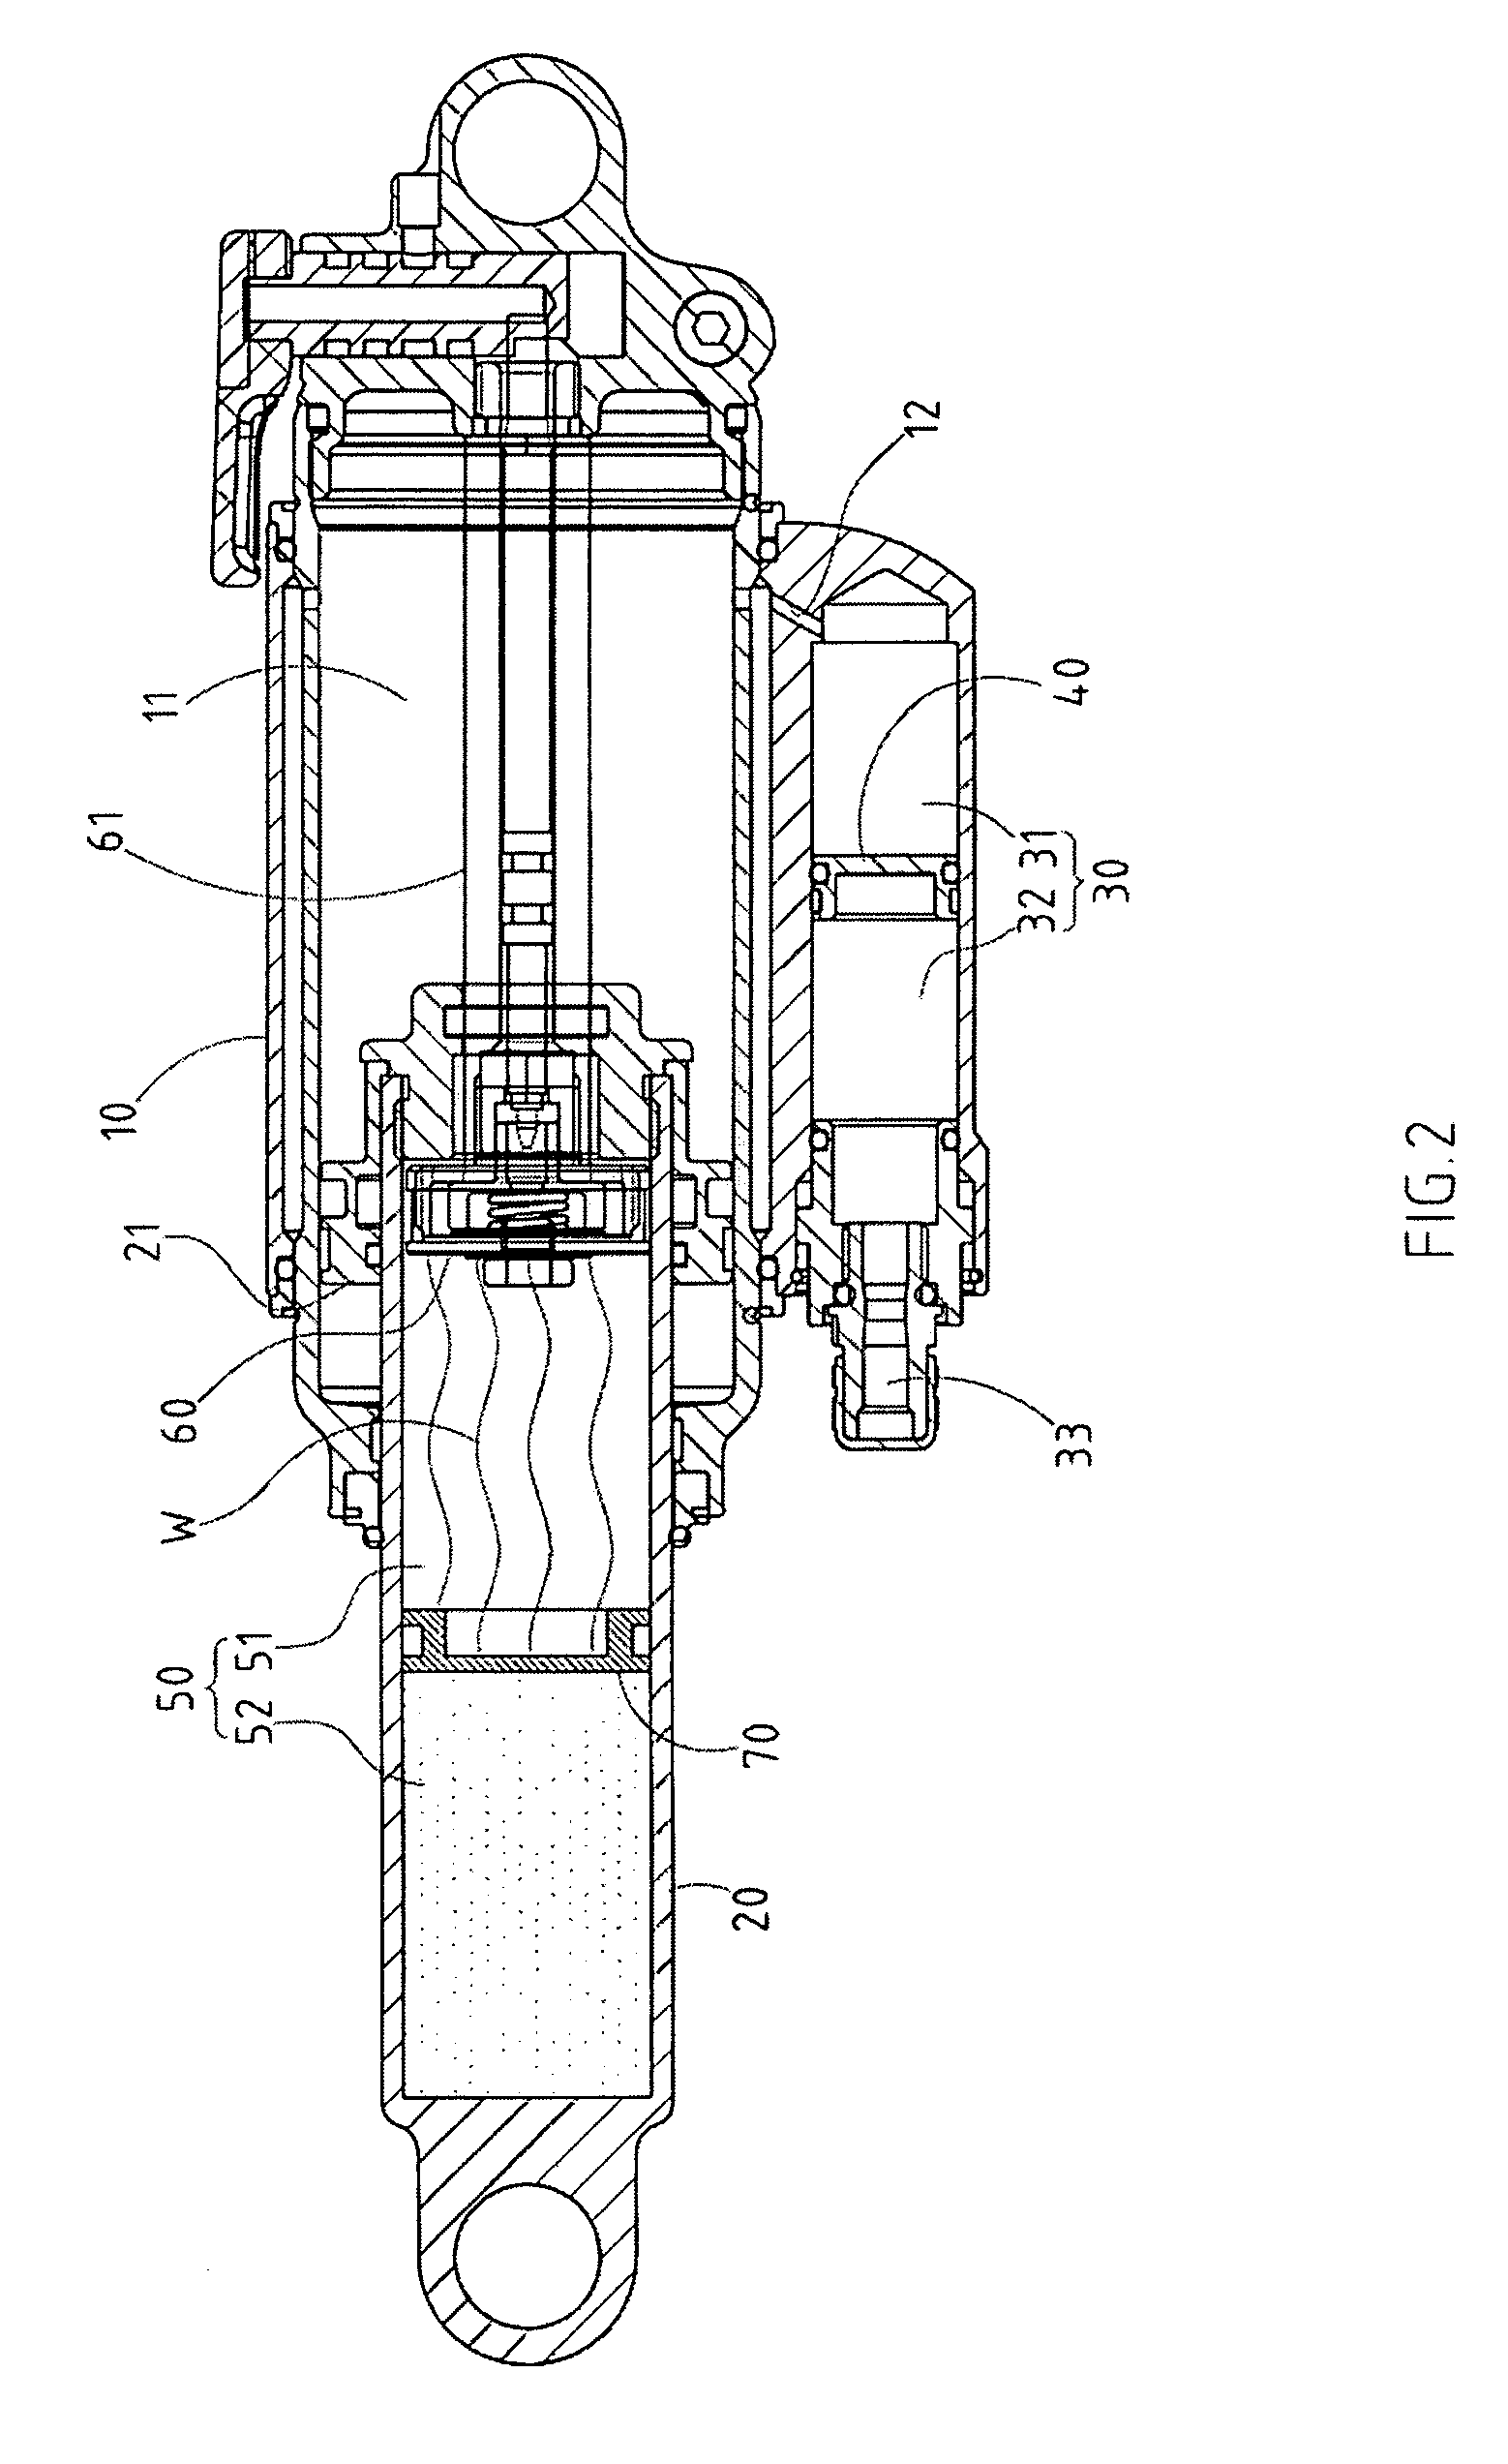 Pneumatic shock absorber with an ancillary air chamber